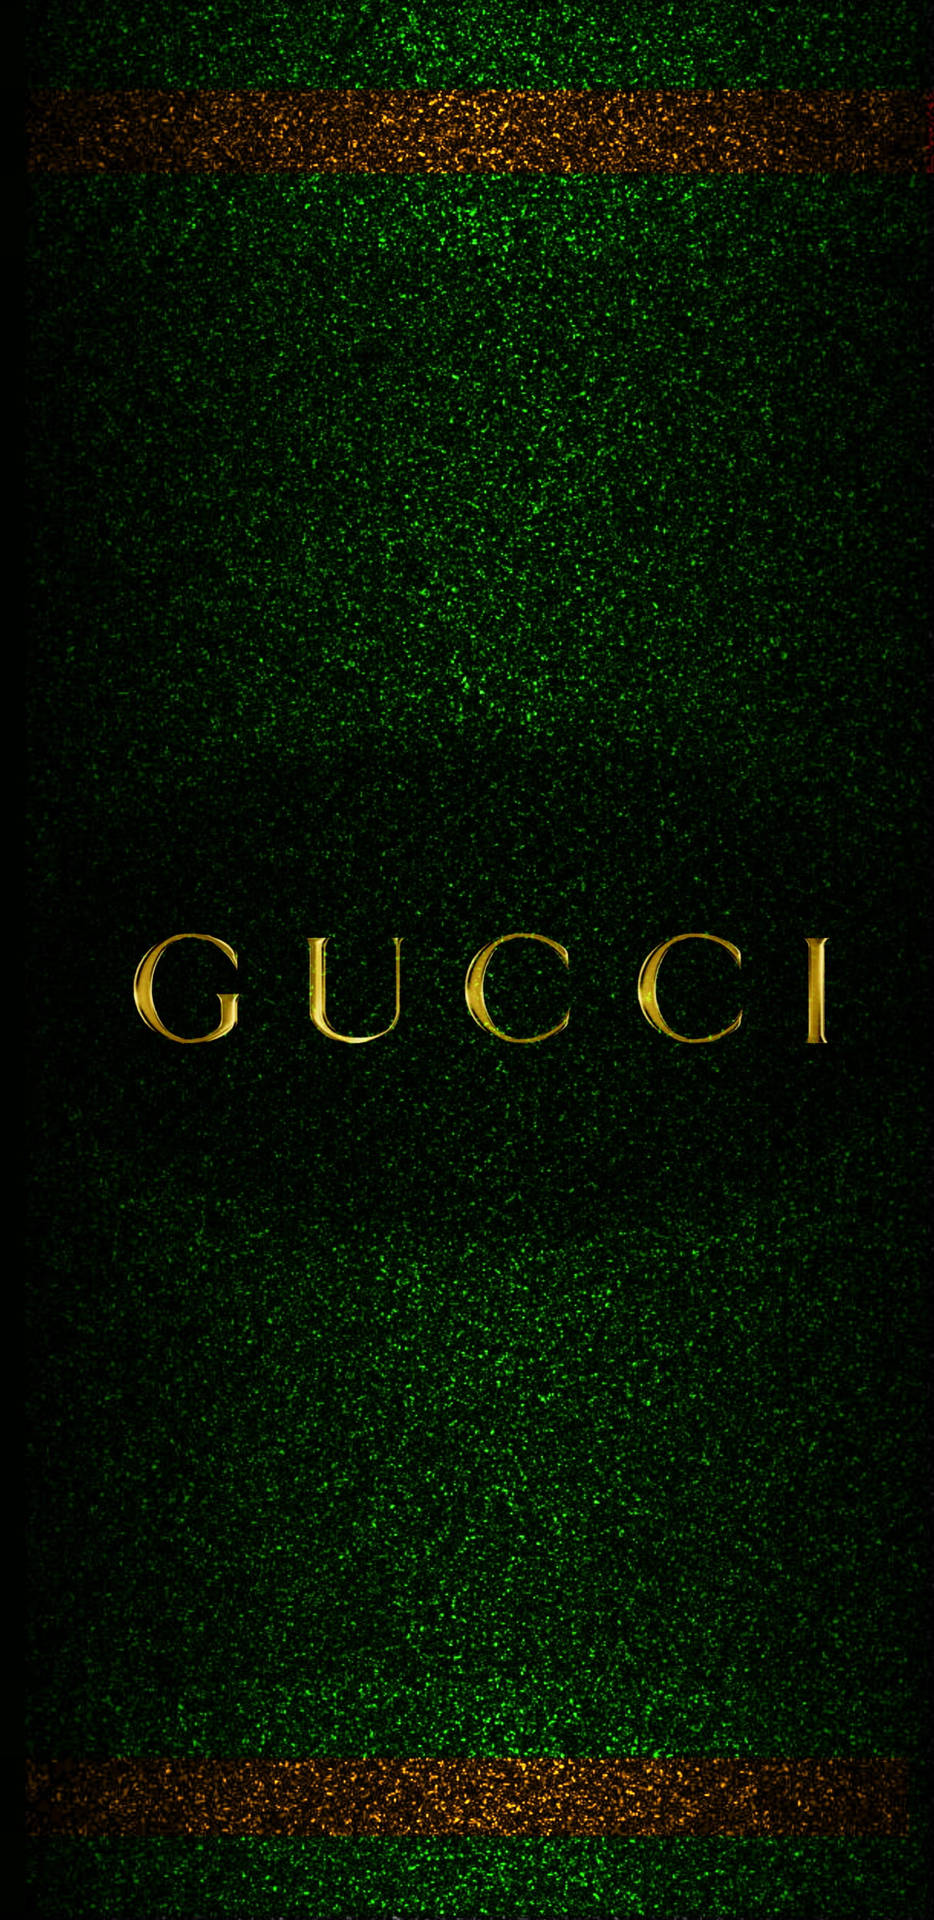 Top 999+ Gucci Iphone Wallpapers Full HD, 4K✅Free to Use